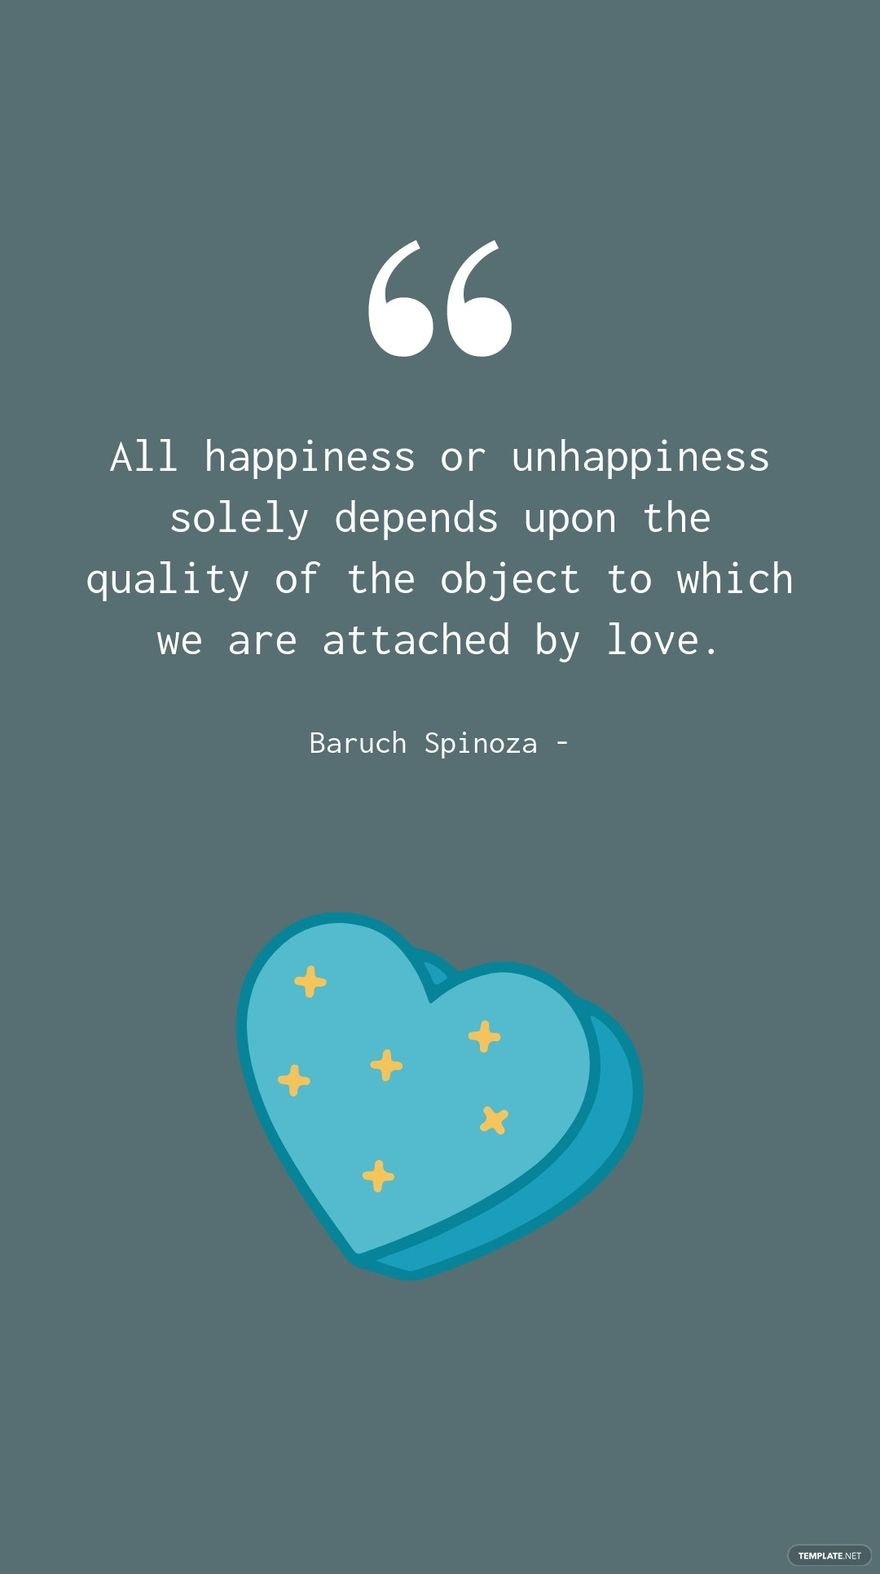 Free Baruch Spinoza - All happiness or unhappiness solely depends upon the quality of the object to which we are attached by love. in JPG